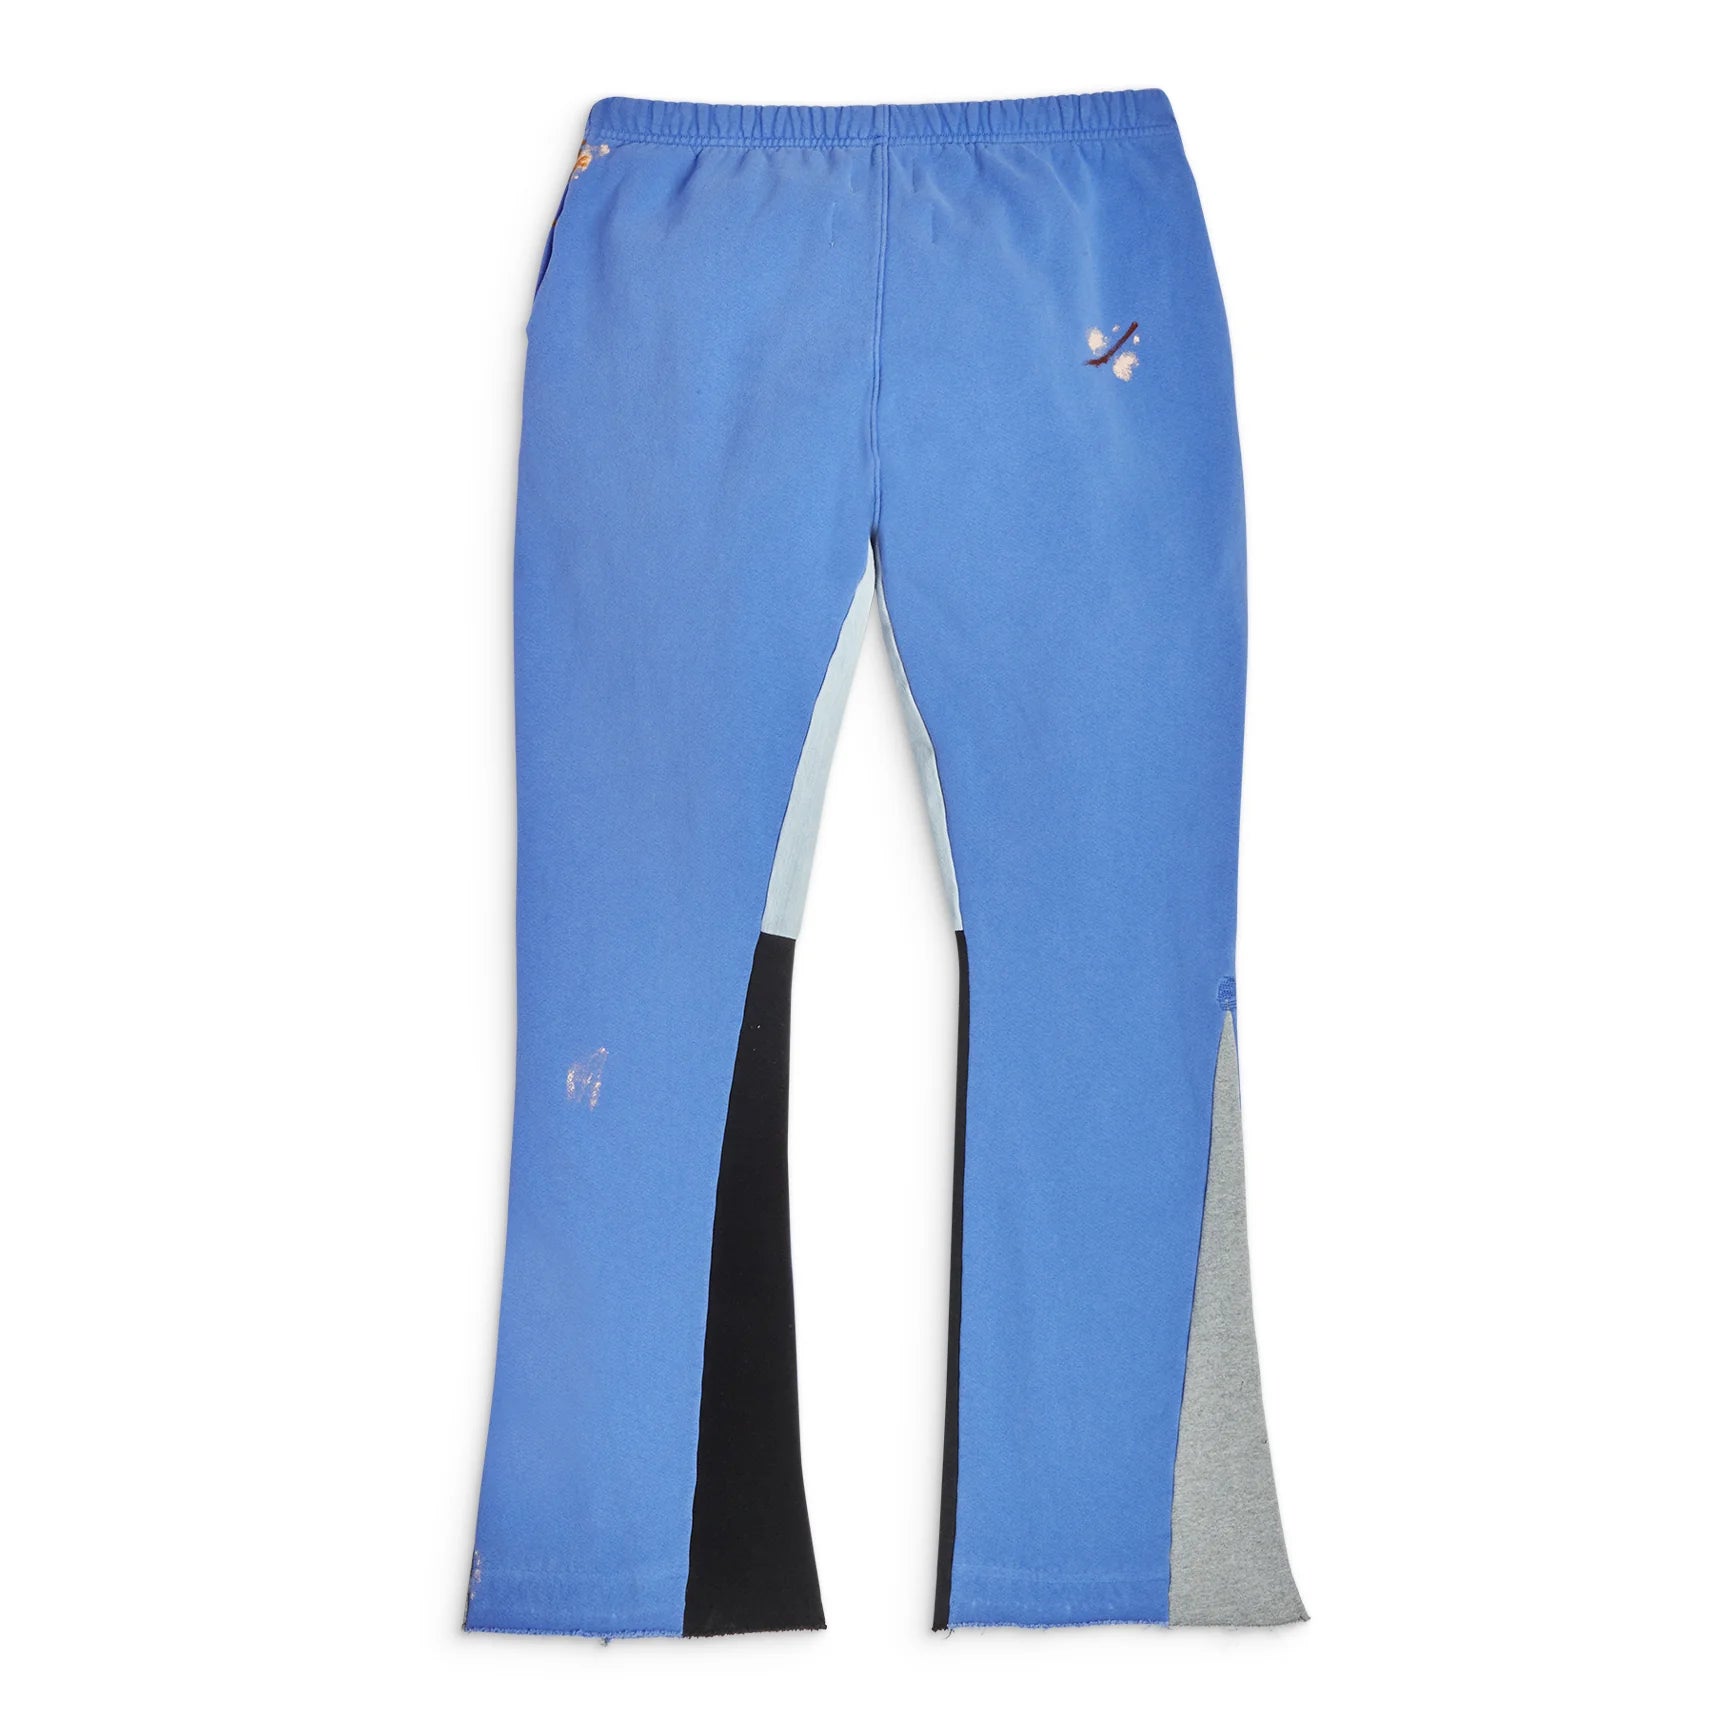 Gallery Dept. Logo Flare Sweatpants Painted Royal Blue